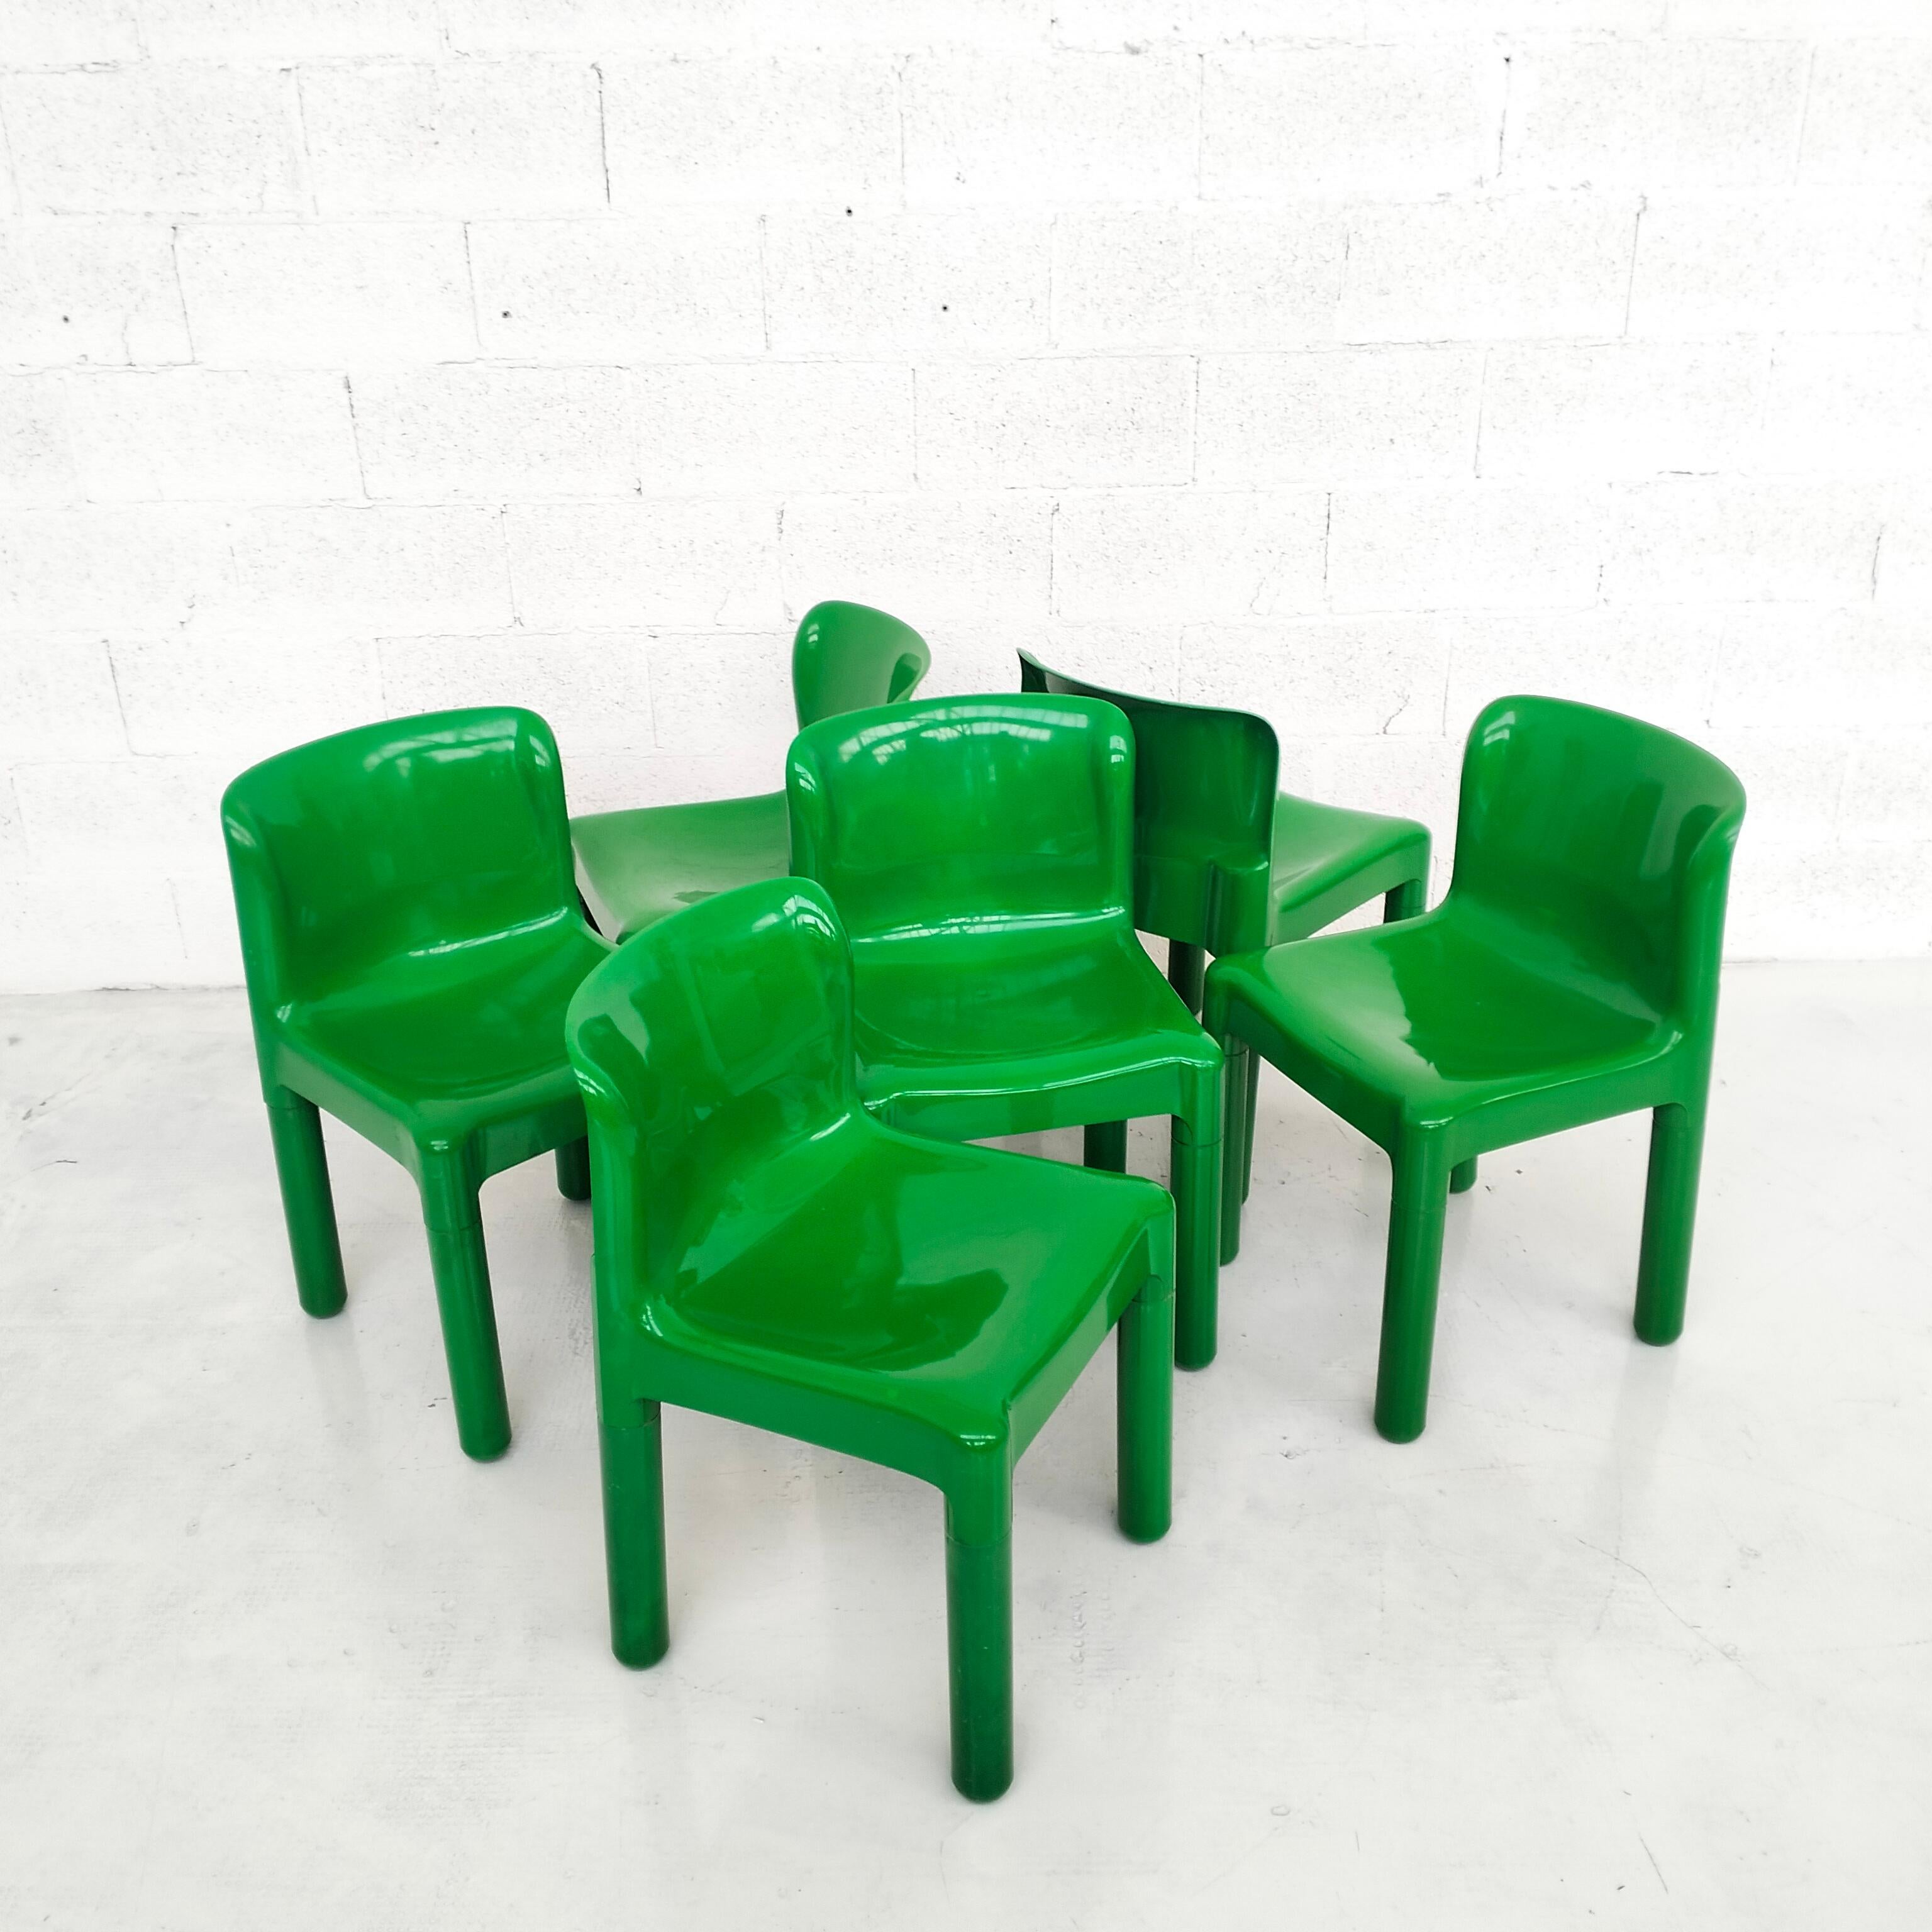 Oustanding and rare set of 6 green plastic chairs 4875 model, designed by Carlo Bartoli and produced by Kartell 1970s. 
In Good condition, wear consistent with age and use.
Dimensions: L 44 cm - D 42 - H 74/43.